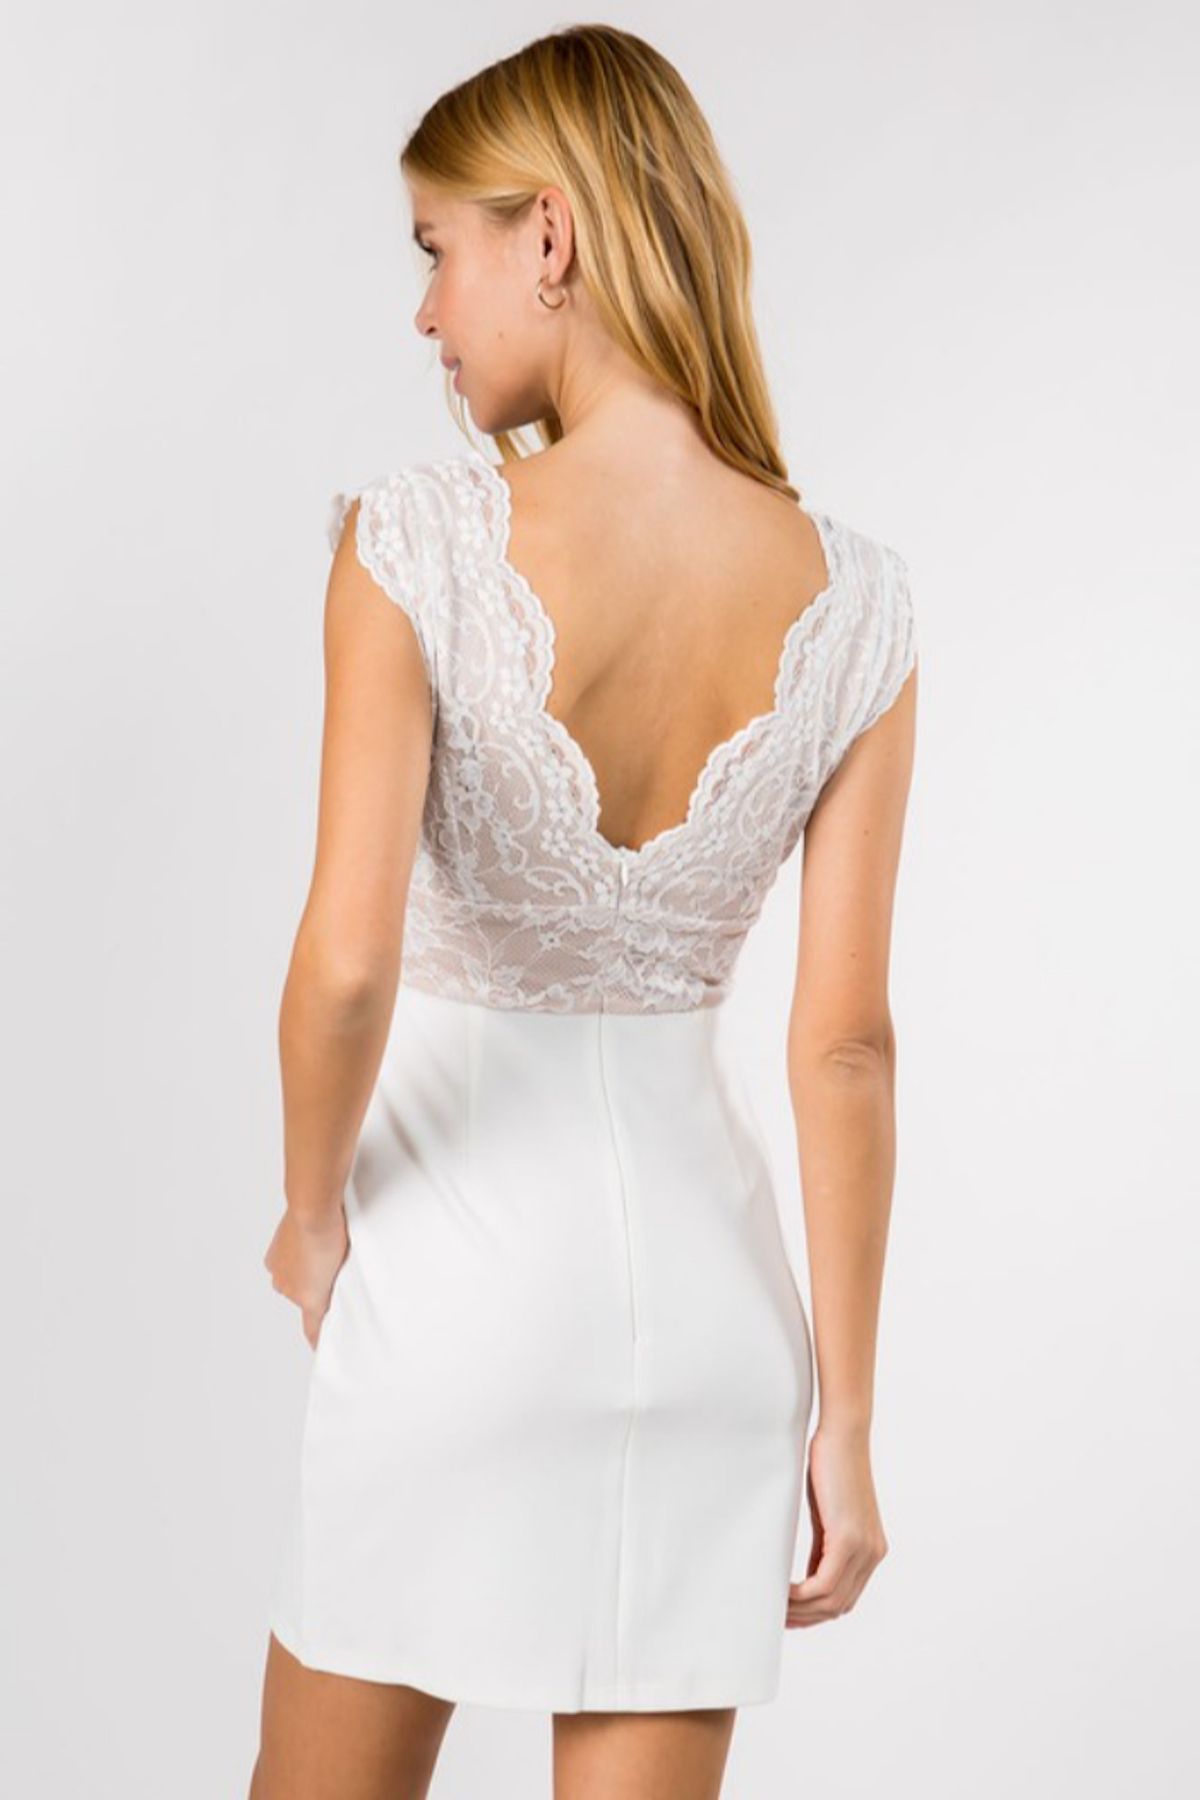 Style EKD2424 Fanco Size 6 Lace White Cocktail Dress on Queenly